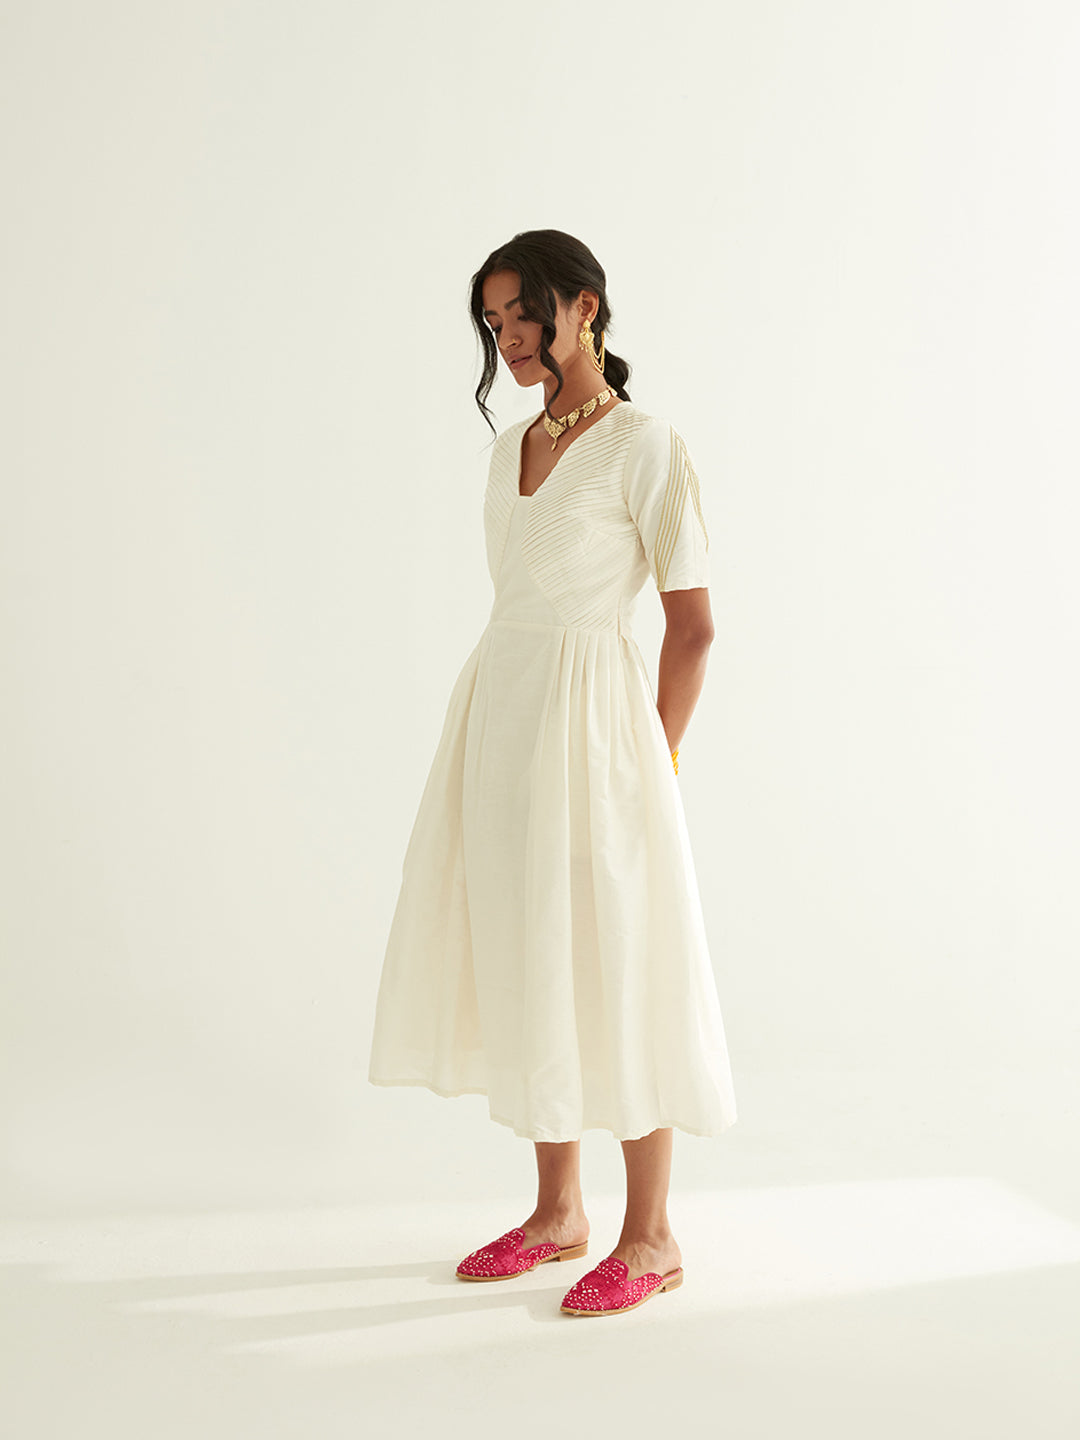 Pleated front dress with lace highlights on sleeves